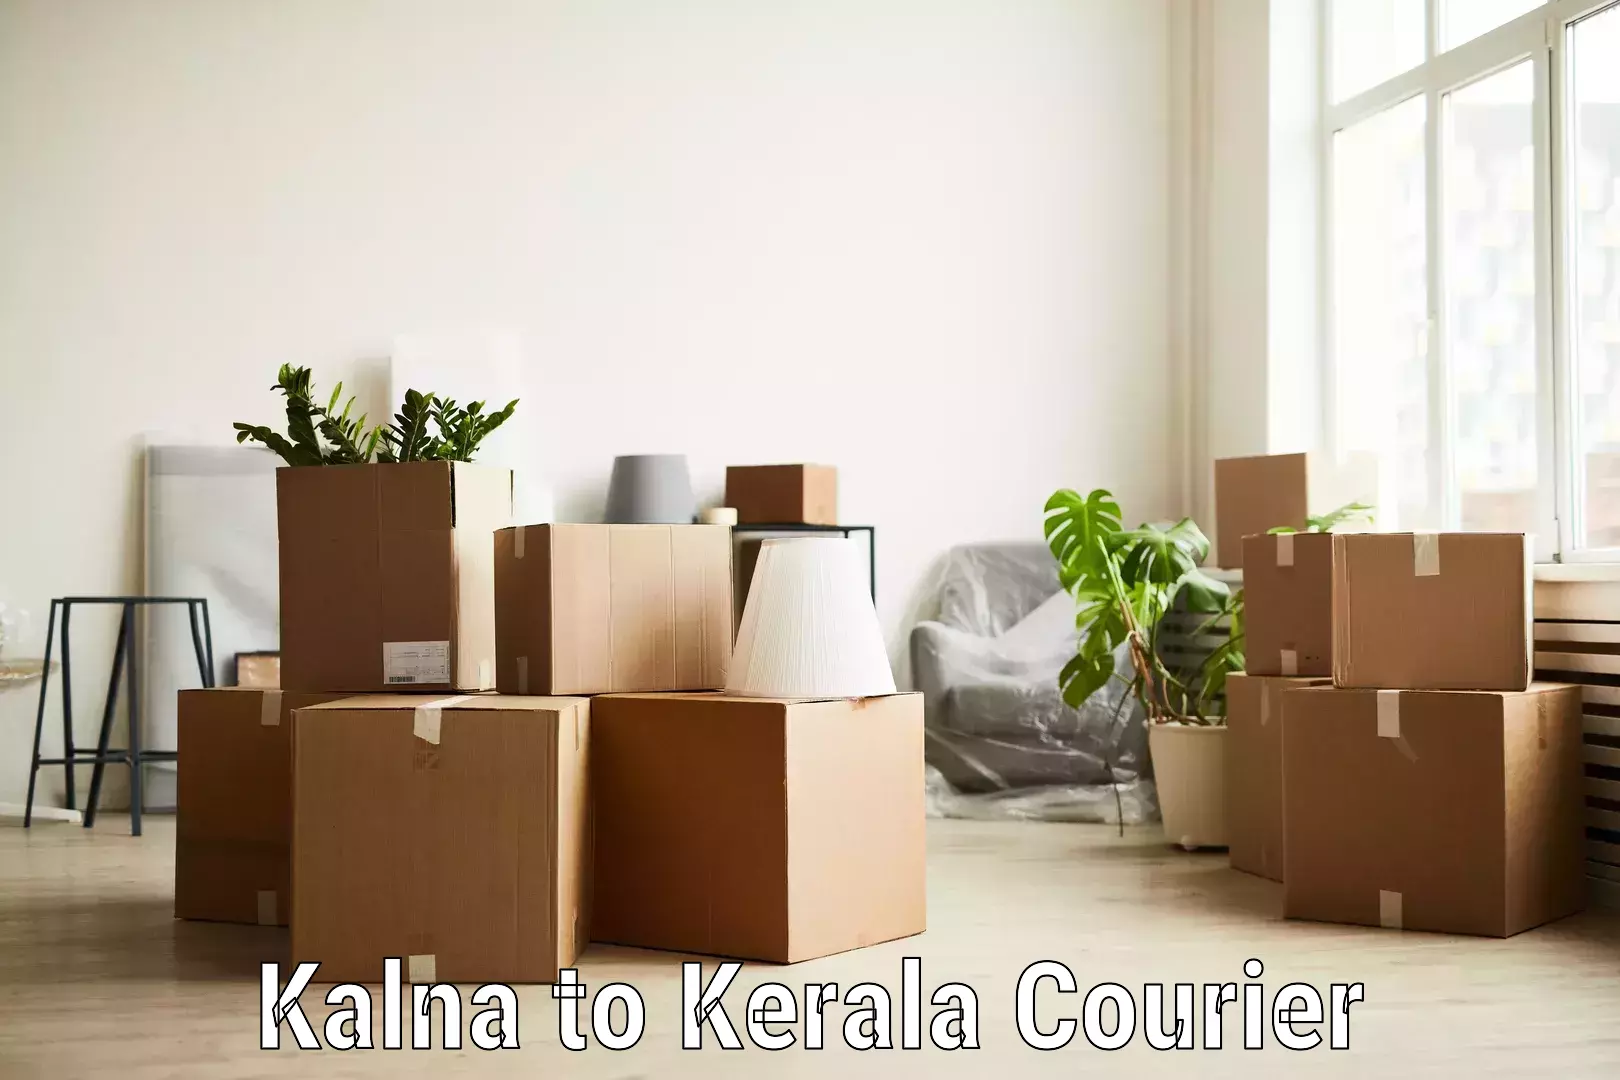 Comprehensive parcel tracking Kalna to Cochin University of Science and Technology